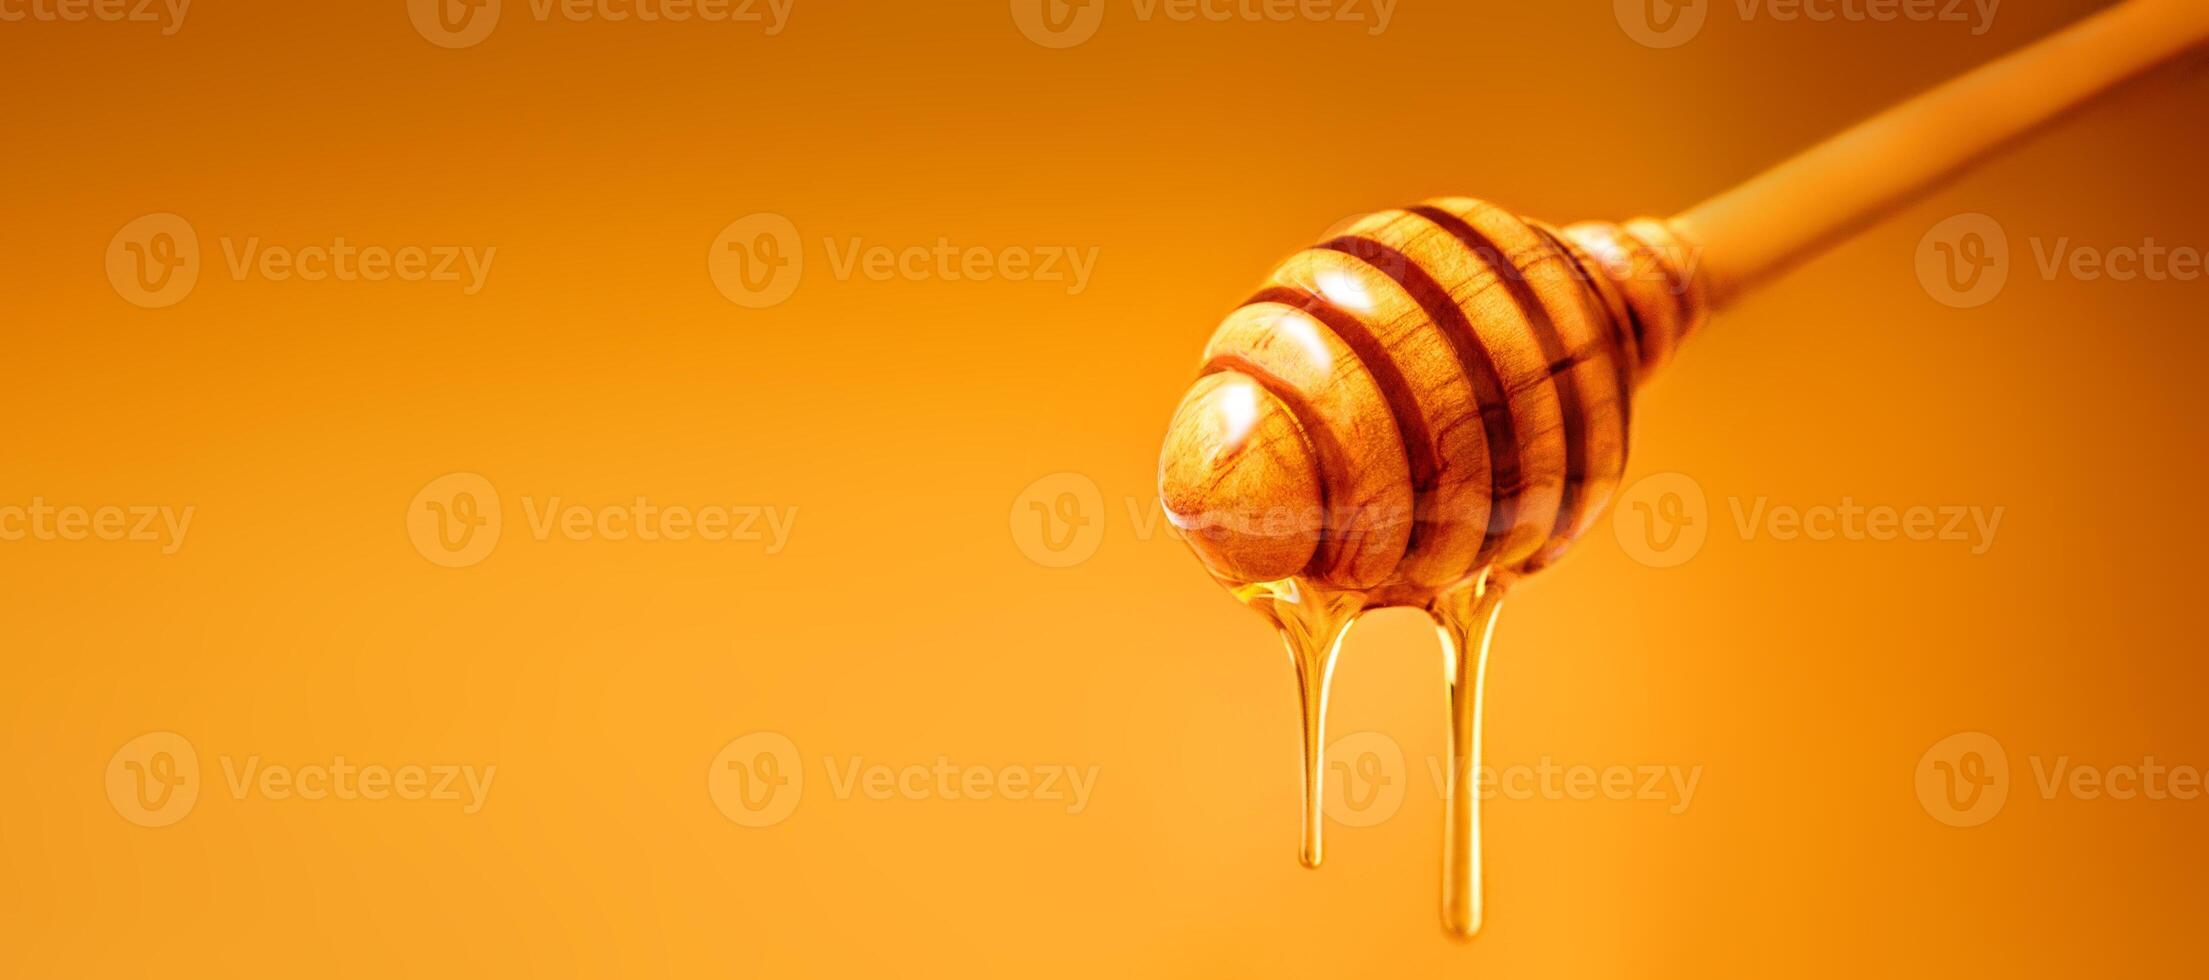 Honey dripping from wooden honey dipper over yellow background. Sweet bee product for your design with copyspace. photo